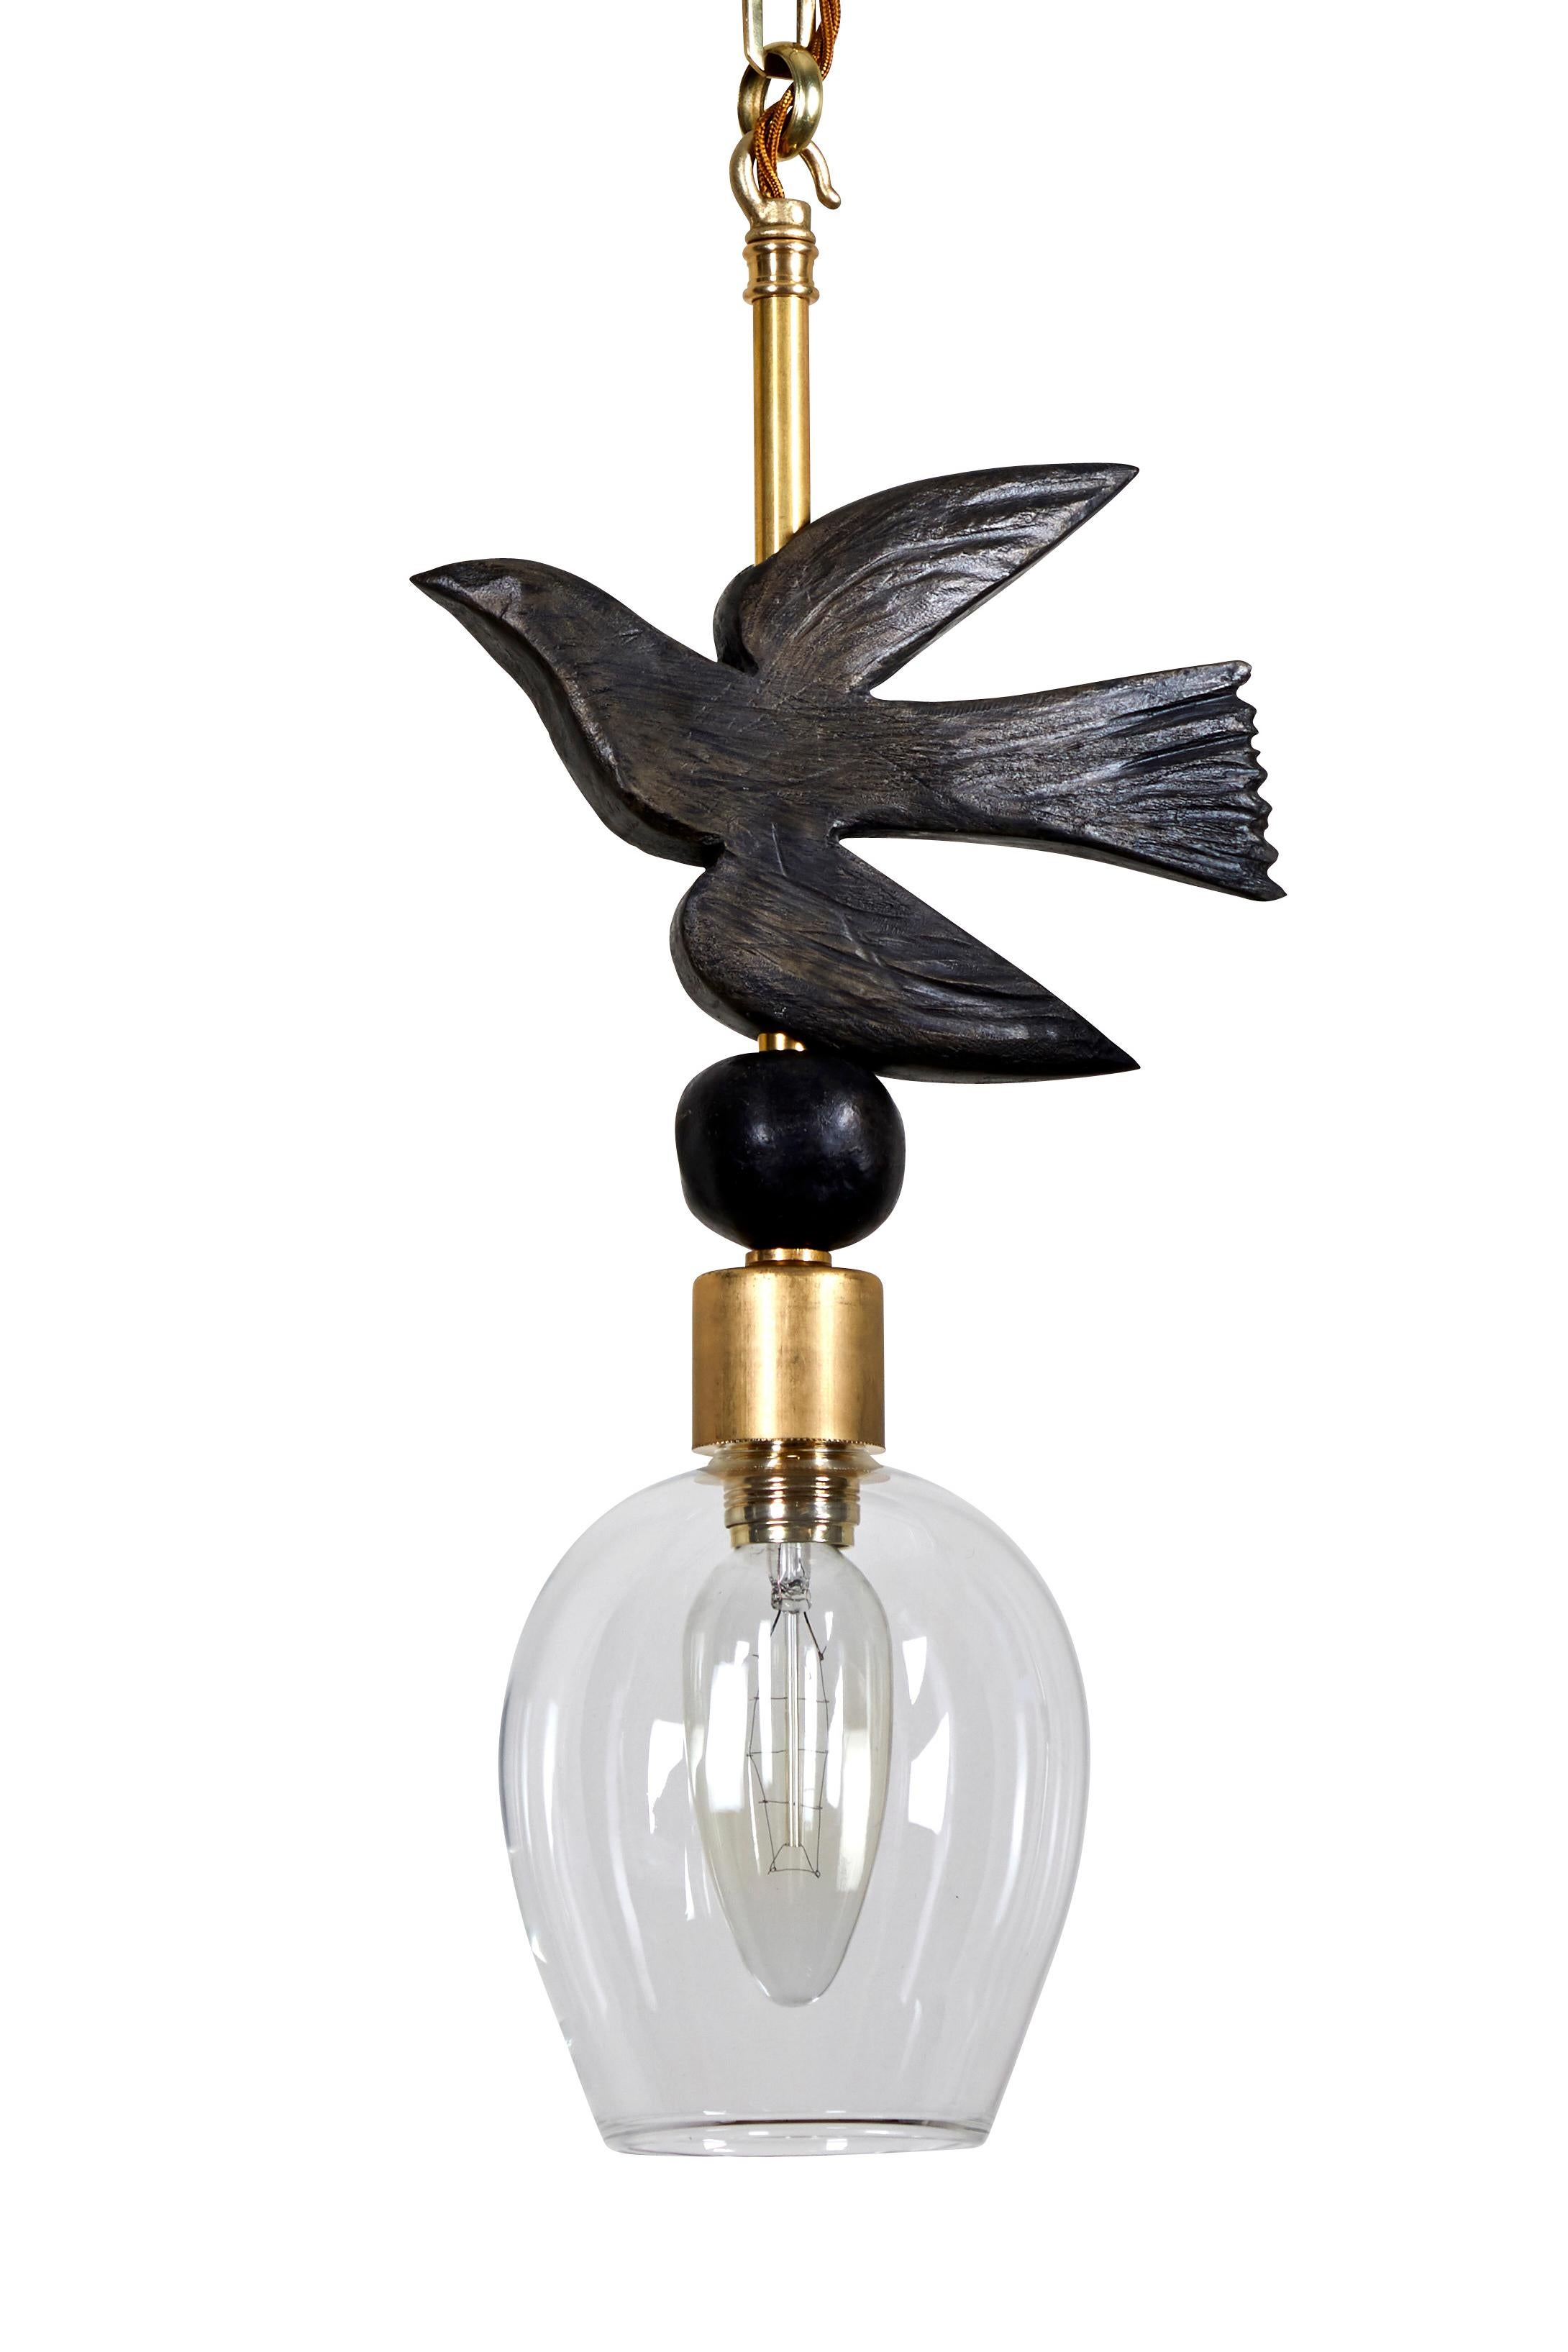 This Margit Wittig pendant (ceiling) light which features a bronze-resin pearl sitting below a hand-sculpted resin bird -in-flight cast in her London studio. The detail elements are hand-finished with a hint of gold patina to enhance the organic